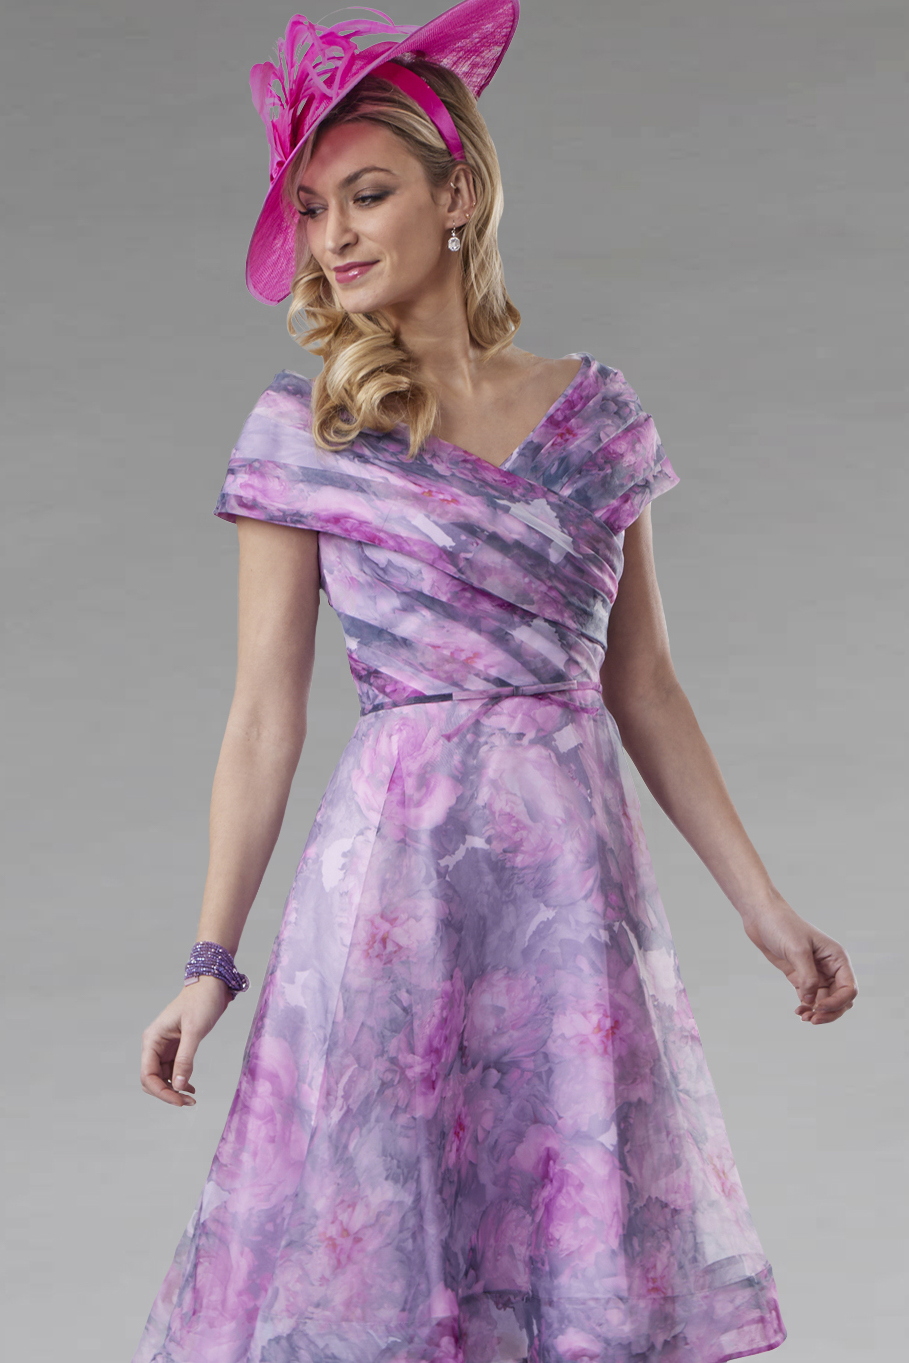 Dipped Hem Dress With Wrap Effect Bodice. VO8130 - Catherines of Partick